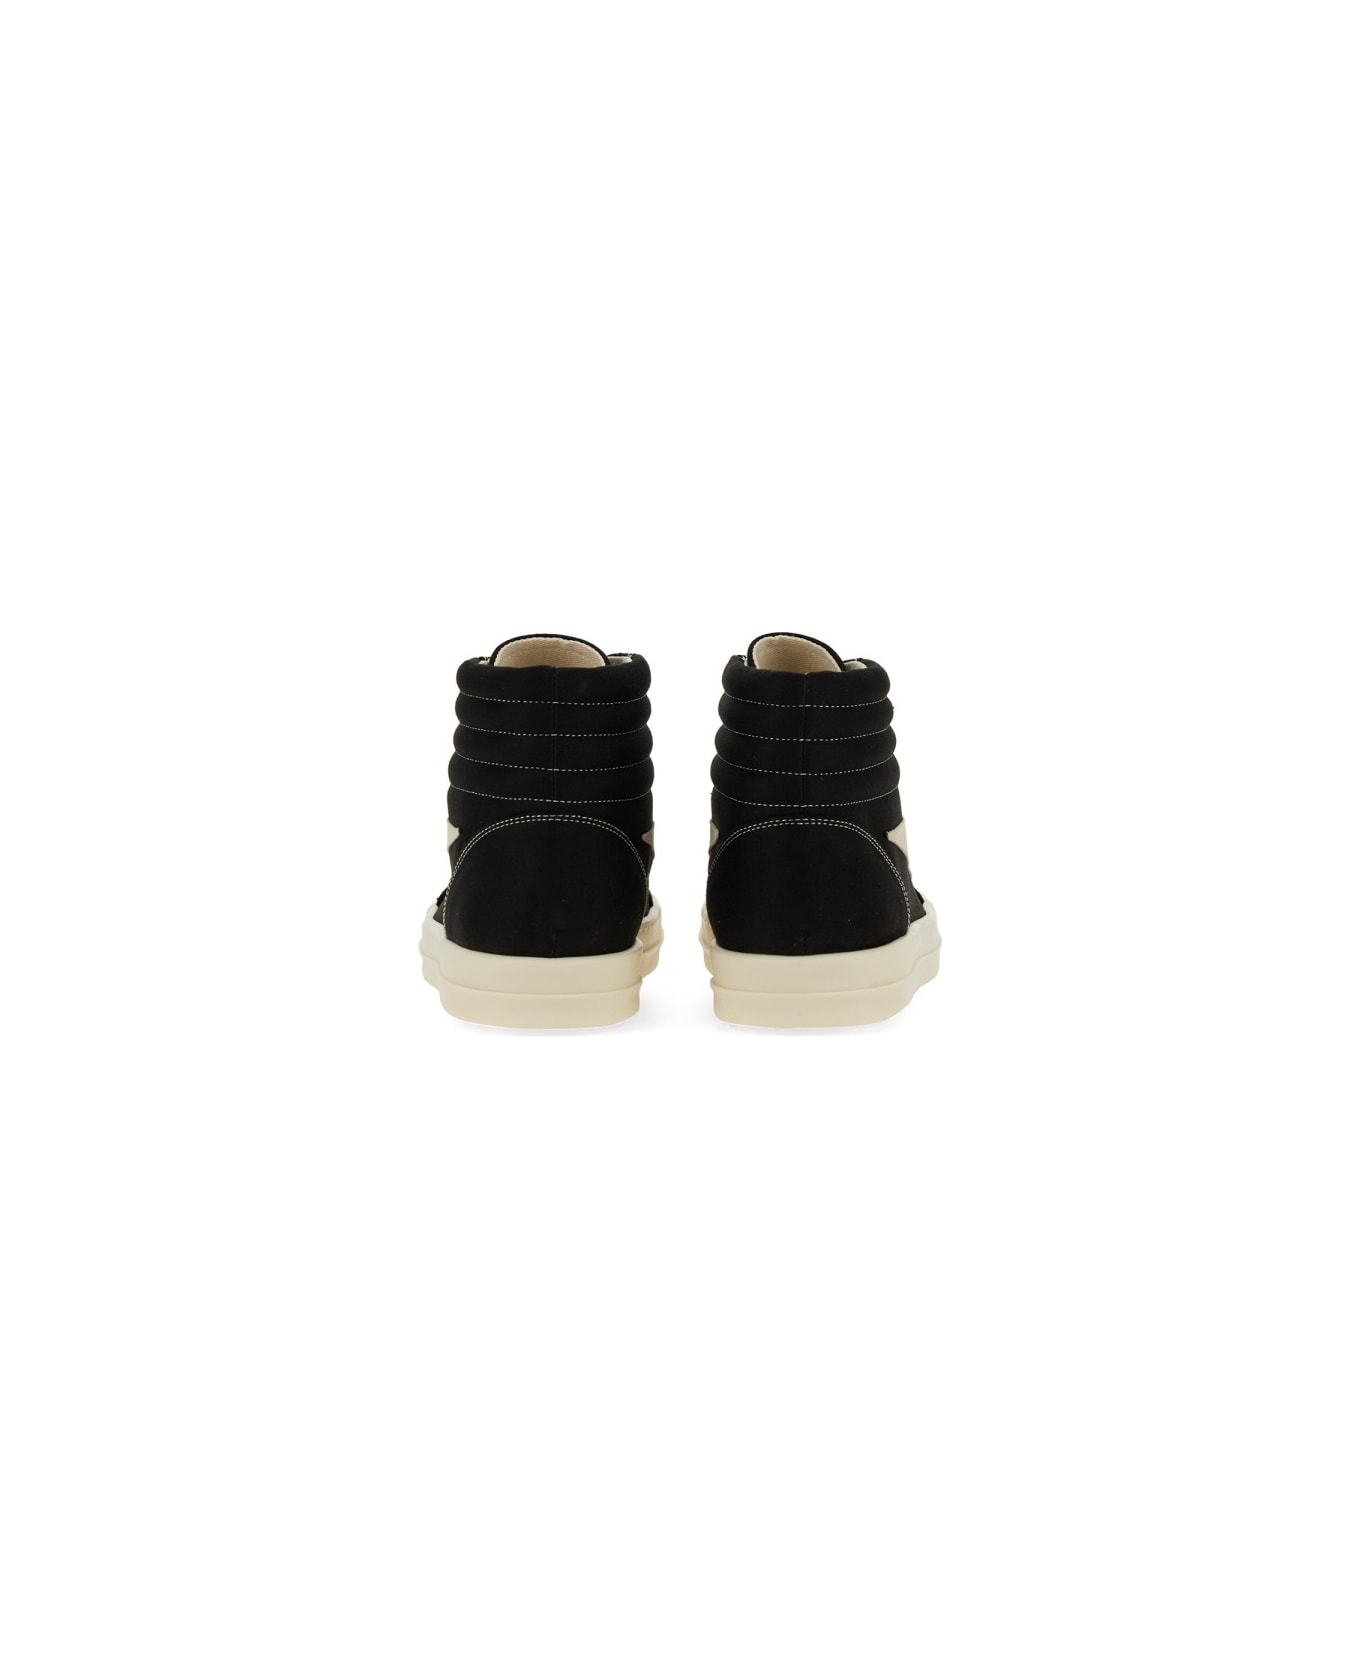 DRKSHDW High-top Lace-up Sneakers - BLACK